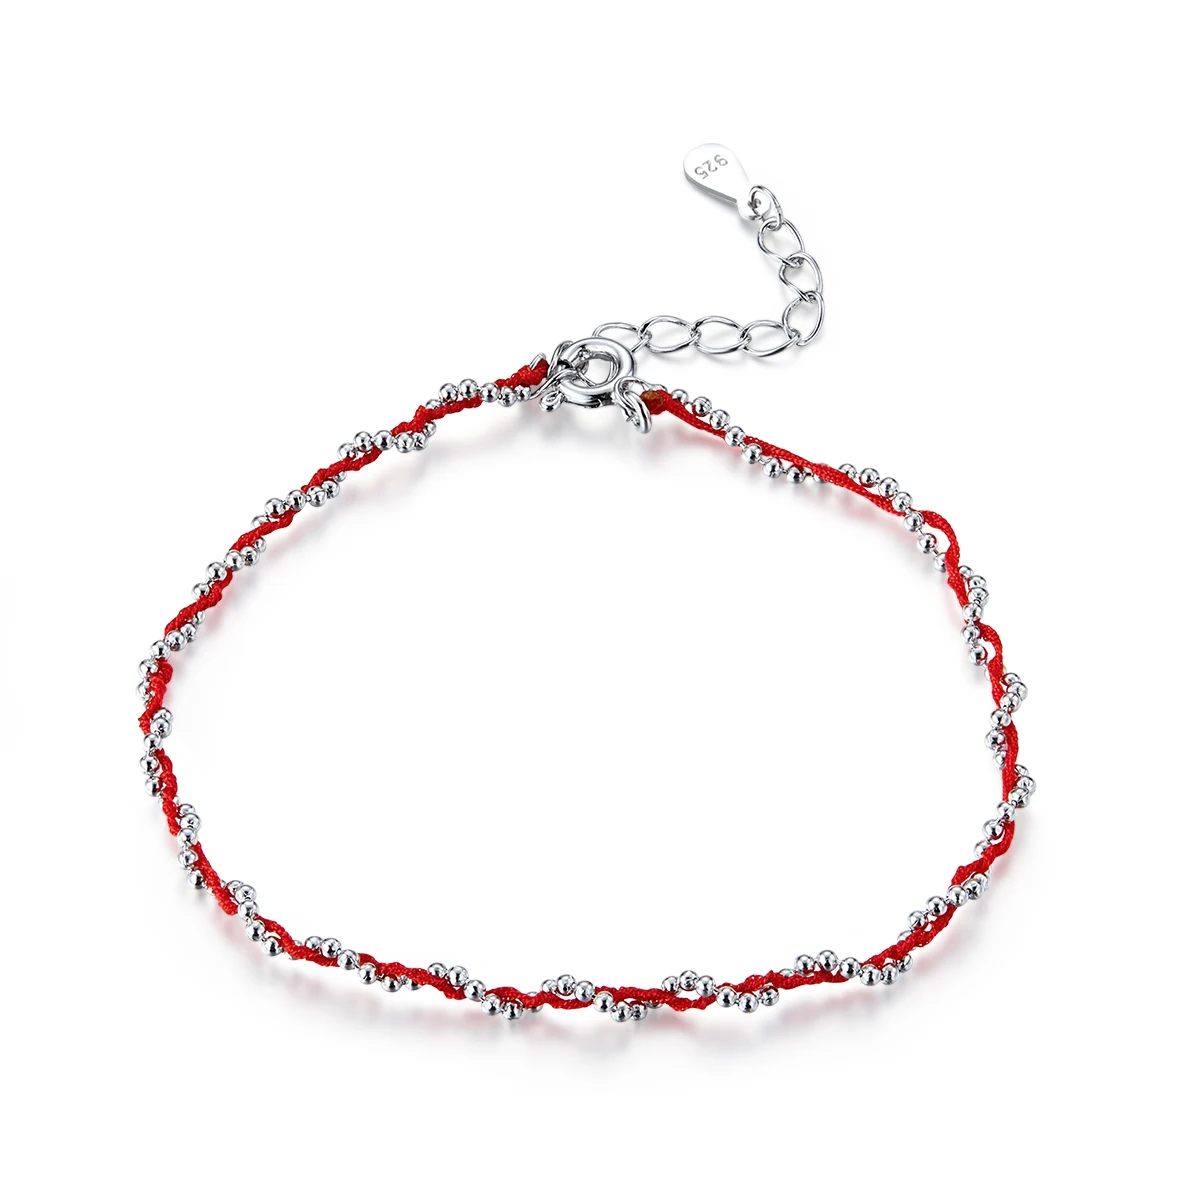 

BAMOER Black and Red Rope Bracelet with 925 Sterling Silver Beads Chain Bracelets for Women New Year Gift Friendship SCB173, Red/black